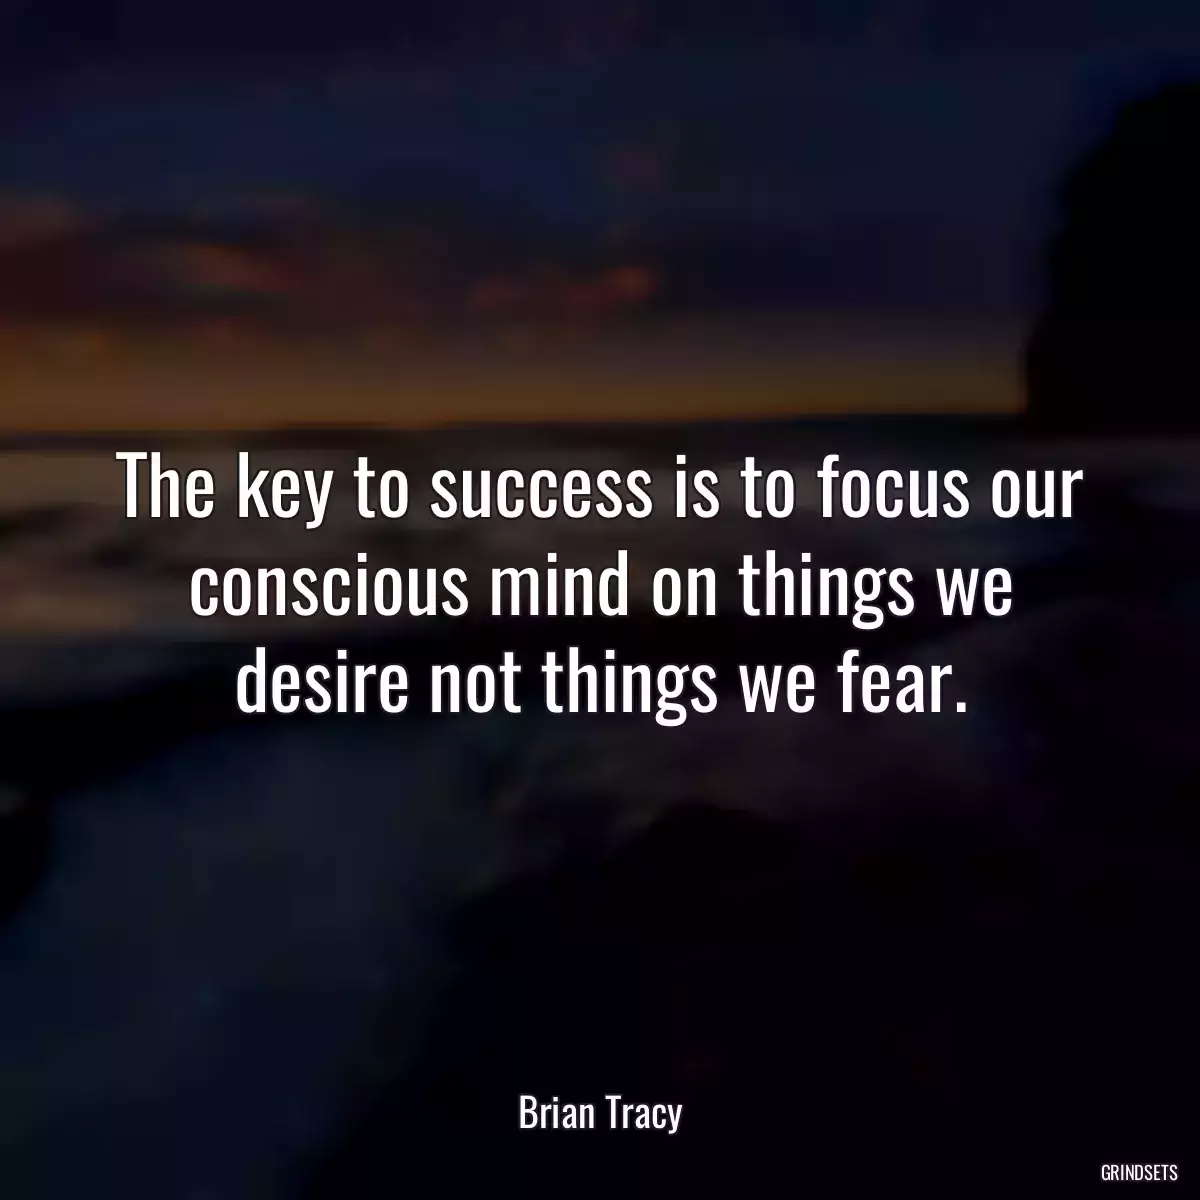 The key to success is to focus our conscious mind on things we desire not things we fear.